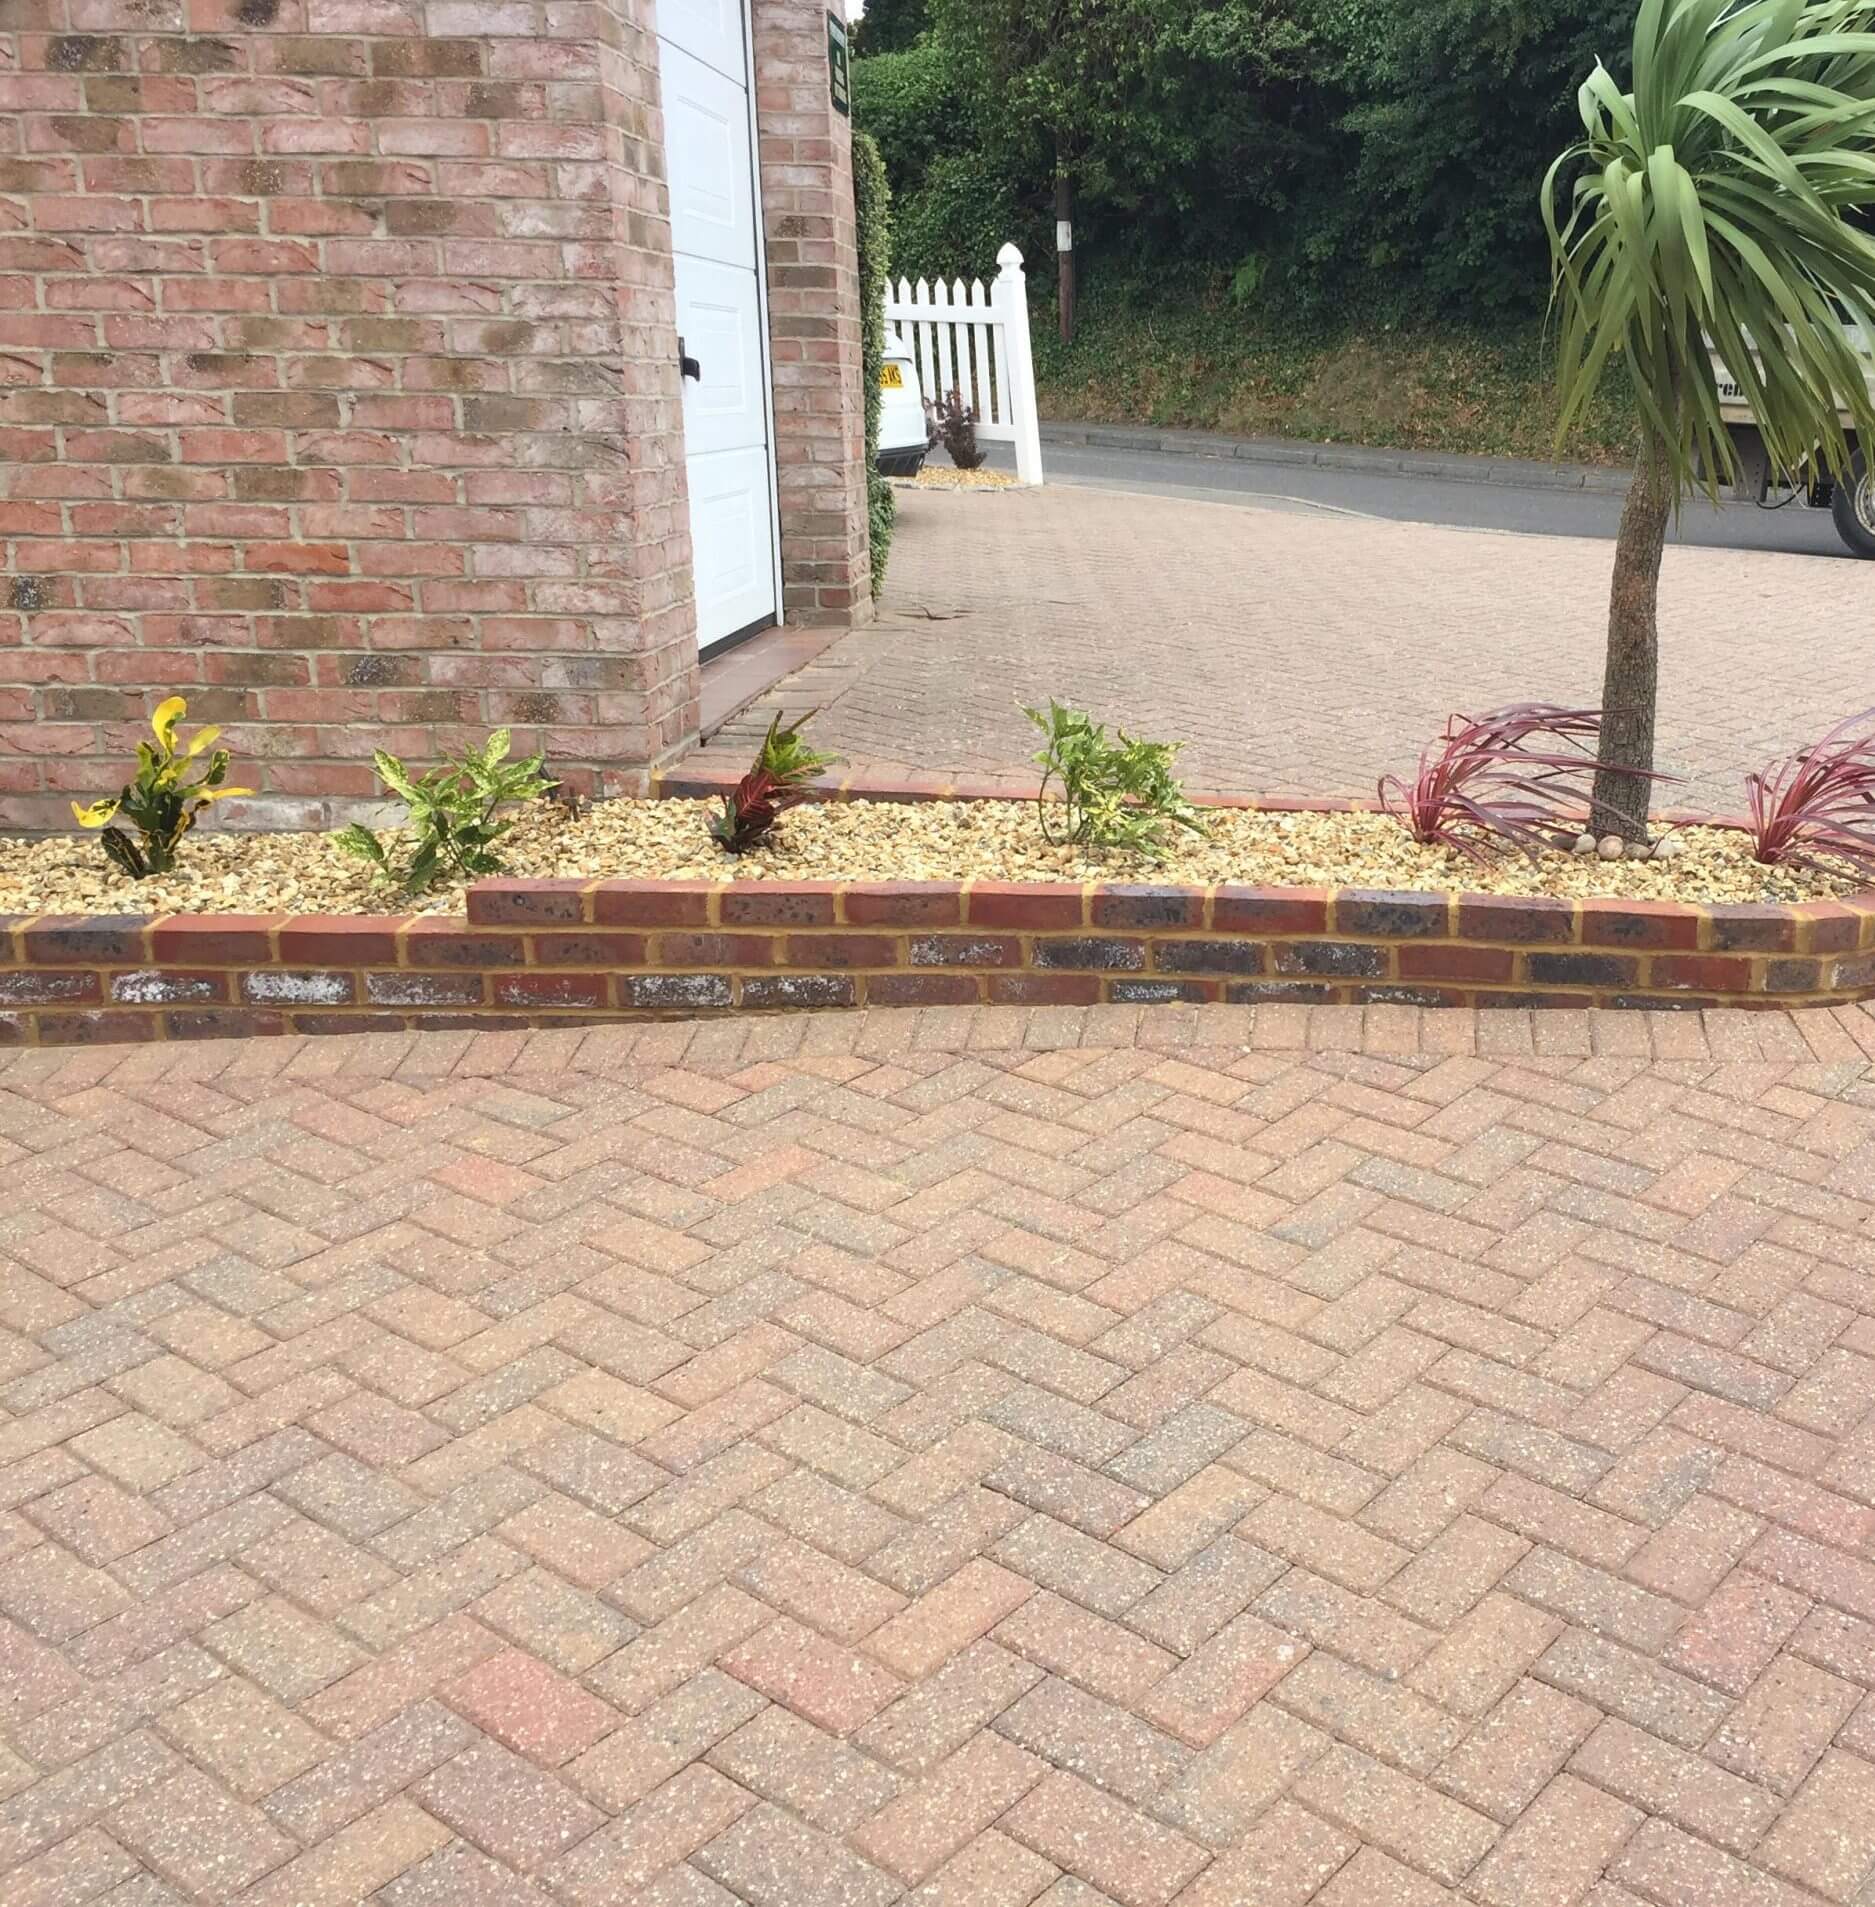 driveway has been re-laid